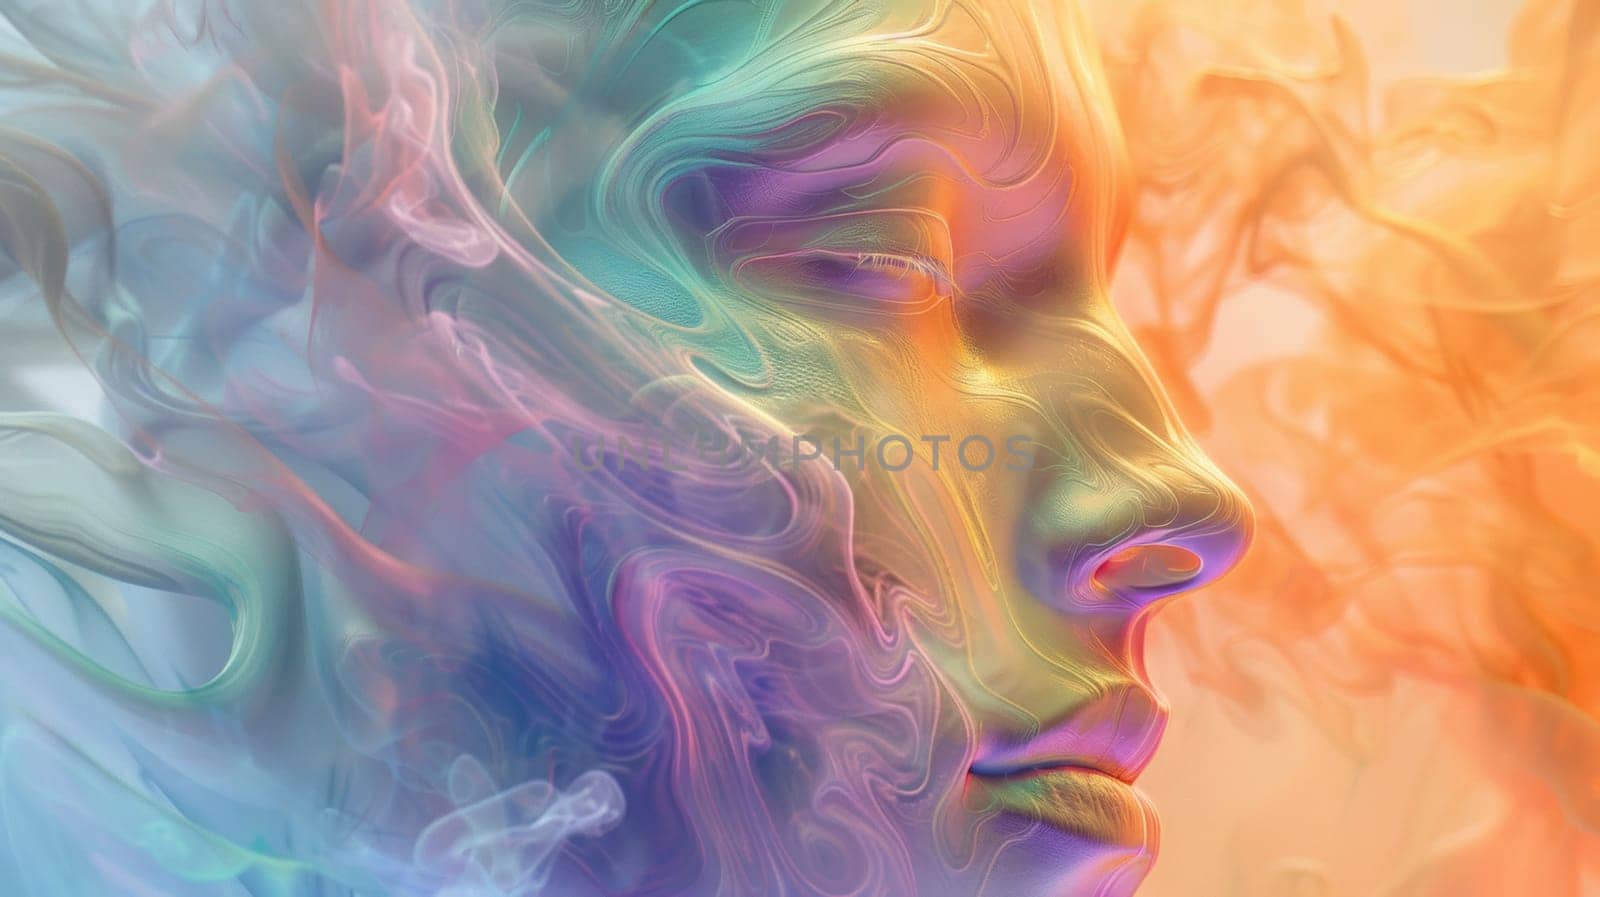 A digital painting of a woman's face with smoke coming out